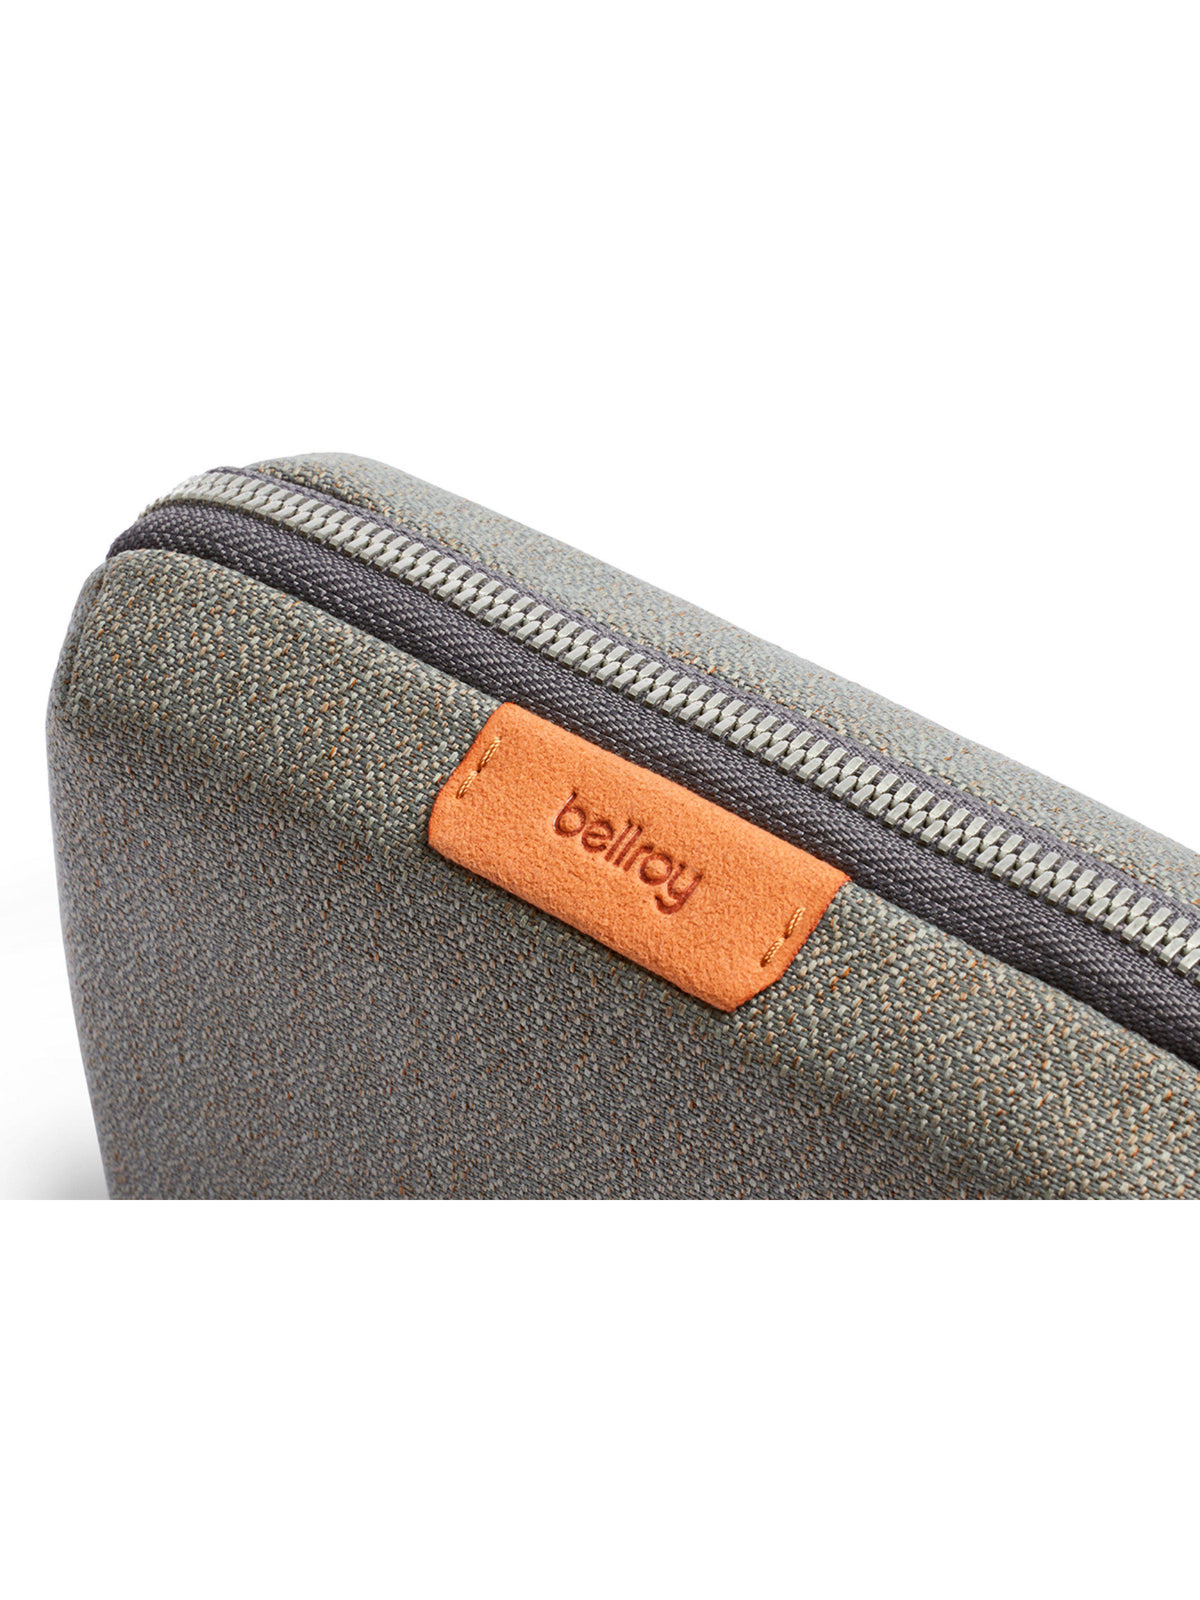 Bellroy Tech Kit Compact Limestone Recycled (Leather-Free)